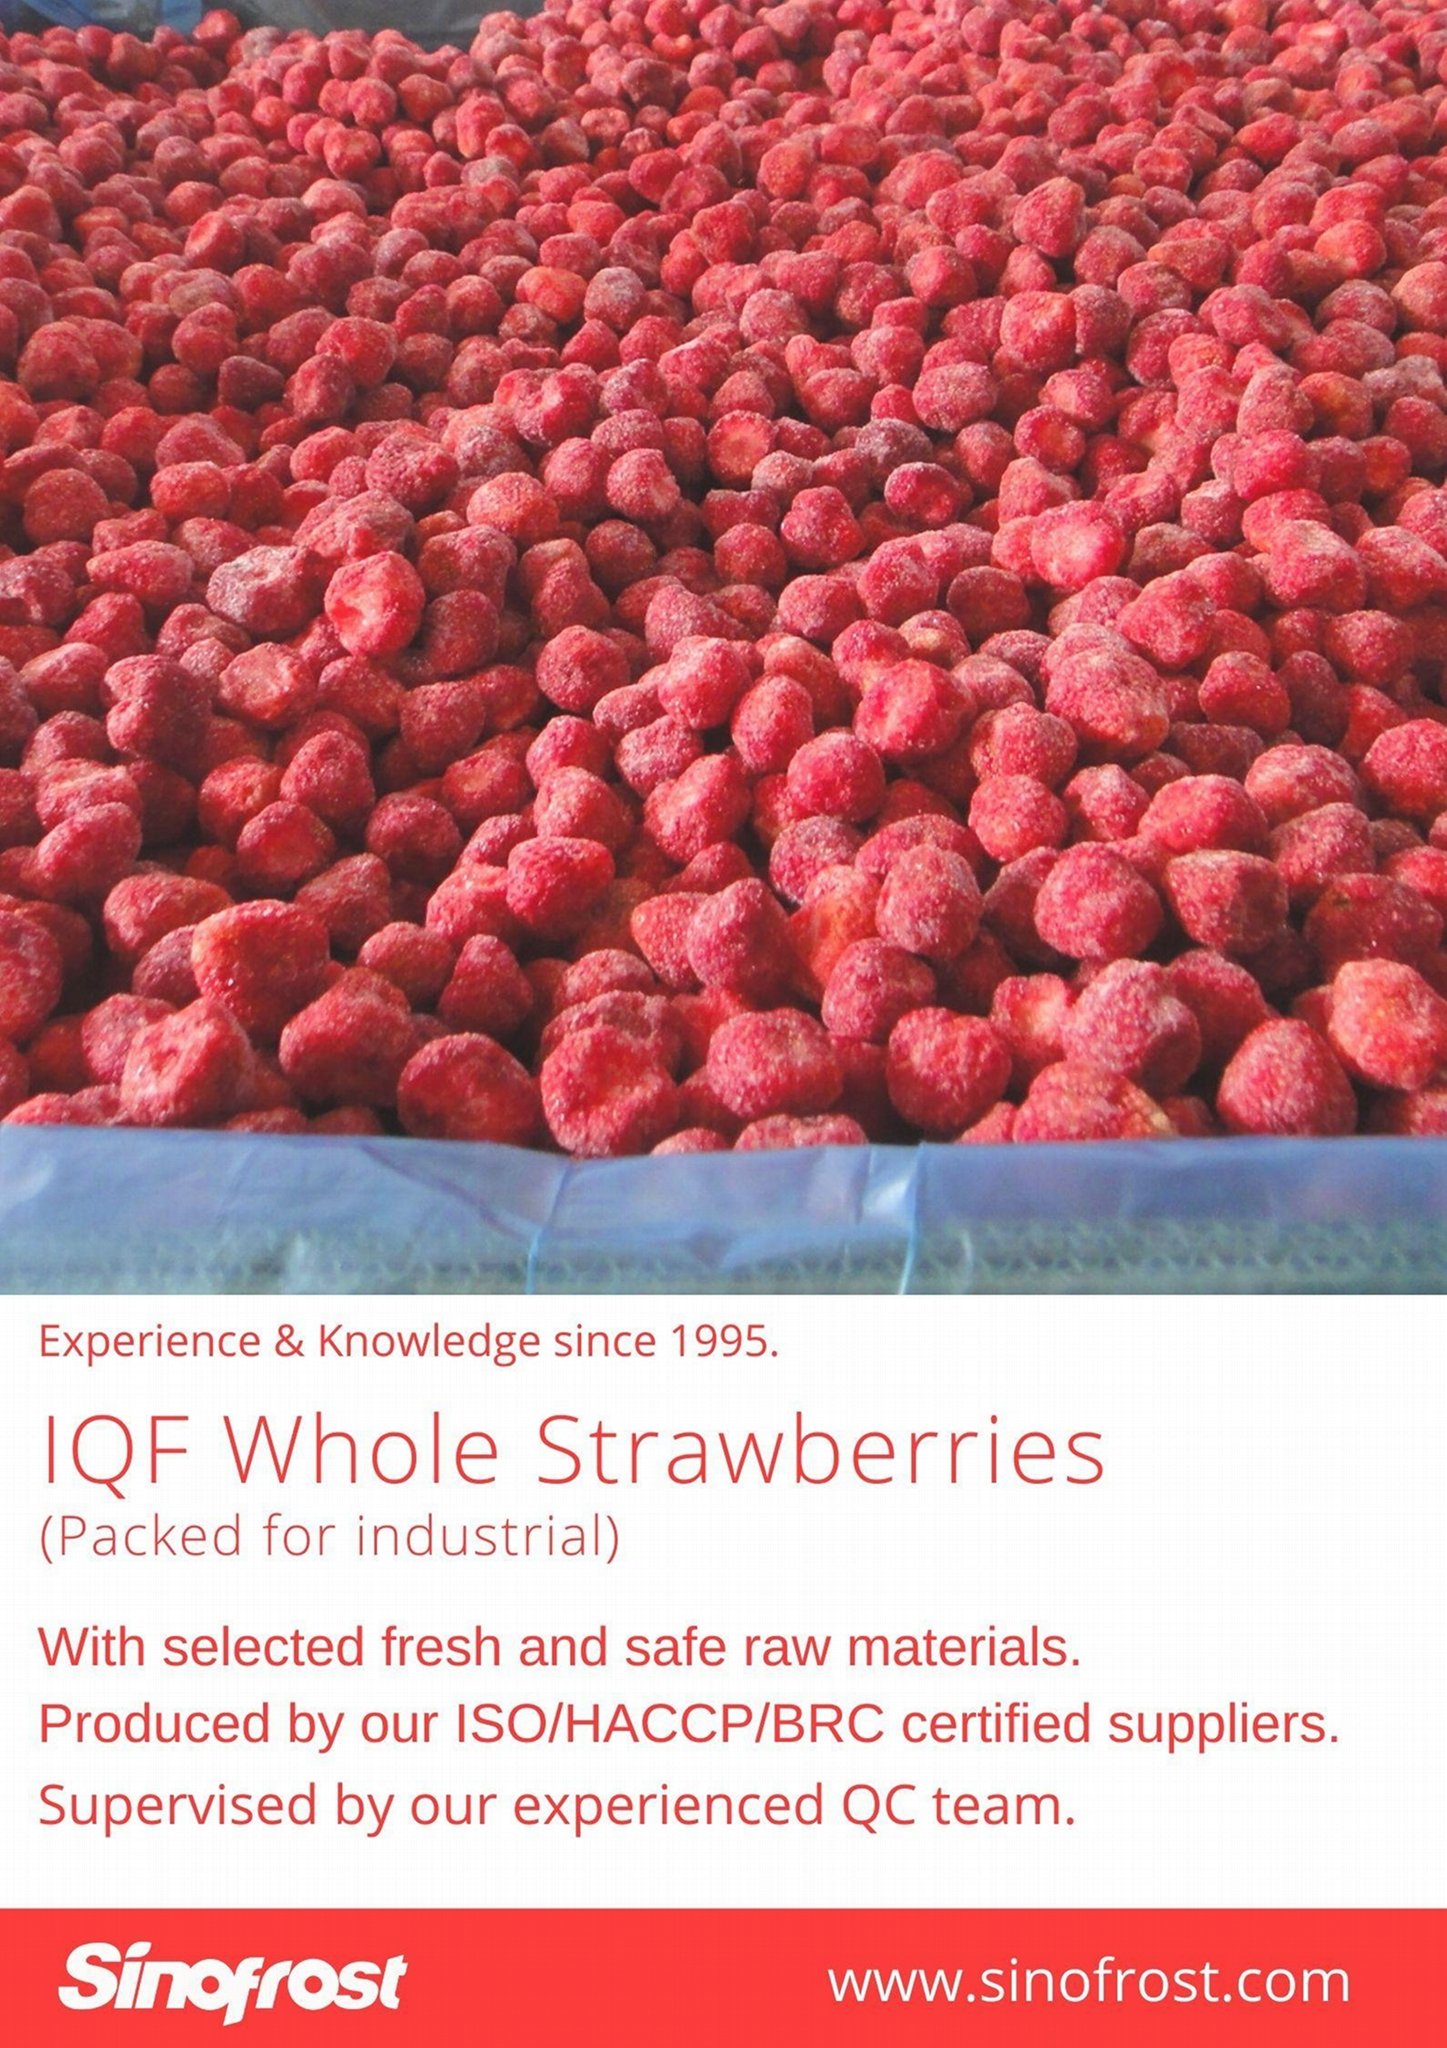 IQF Strawberries,Frozen Whole Strawberries,IQF Strawberry,American no.13 variety 15